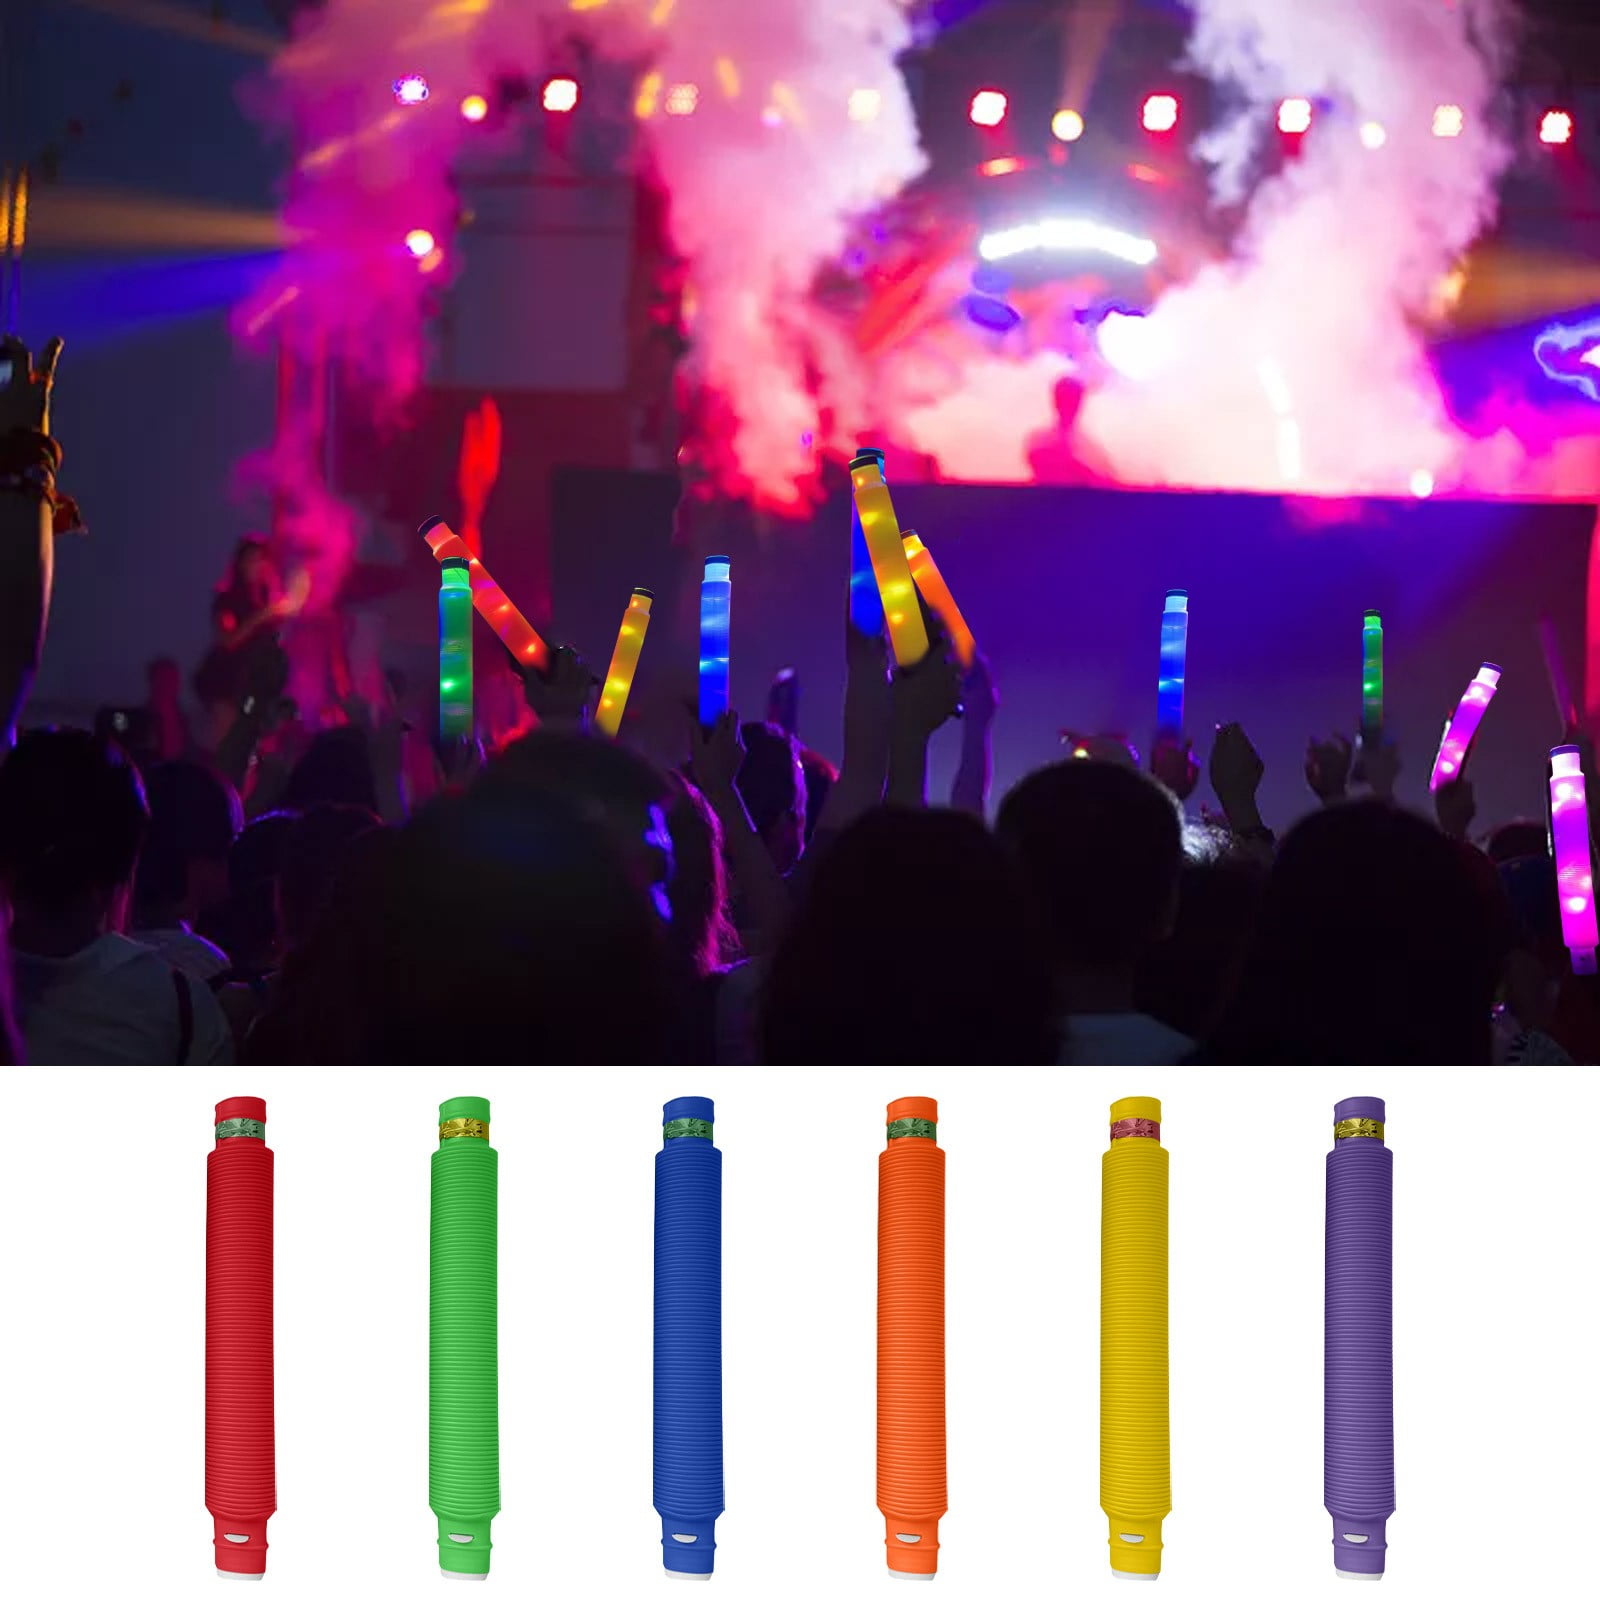 Fridja Christmas LED Light Up Tubes Sensory Toys for Toddlers, Party Favors Decorations Pull and Stretch Toys for Kids Halloween Christmas Party